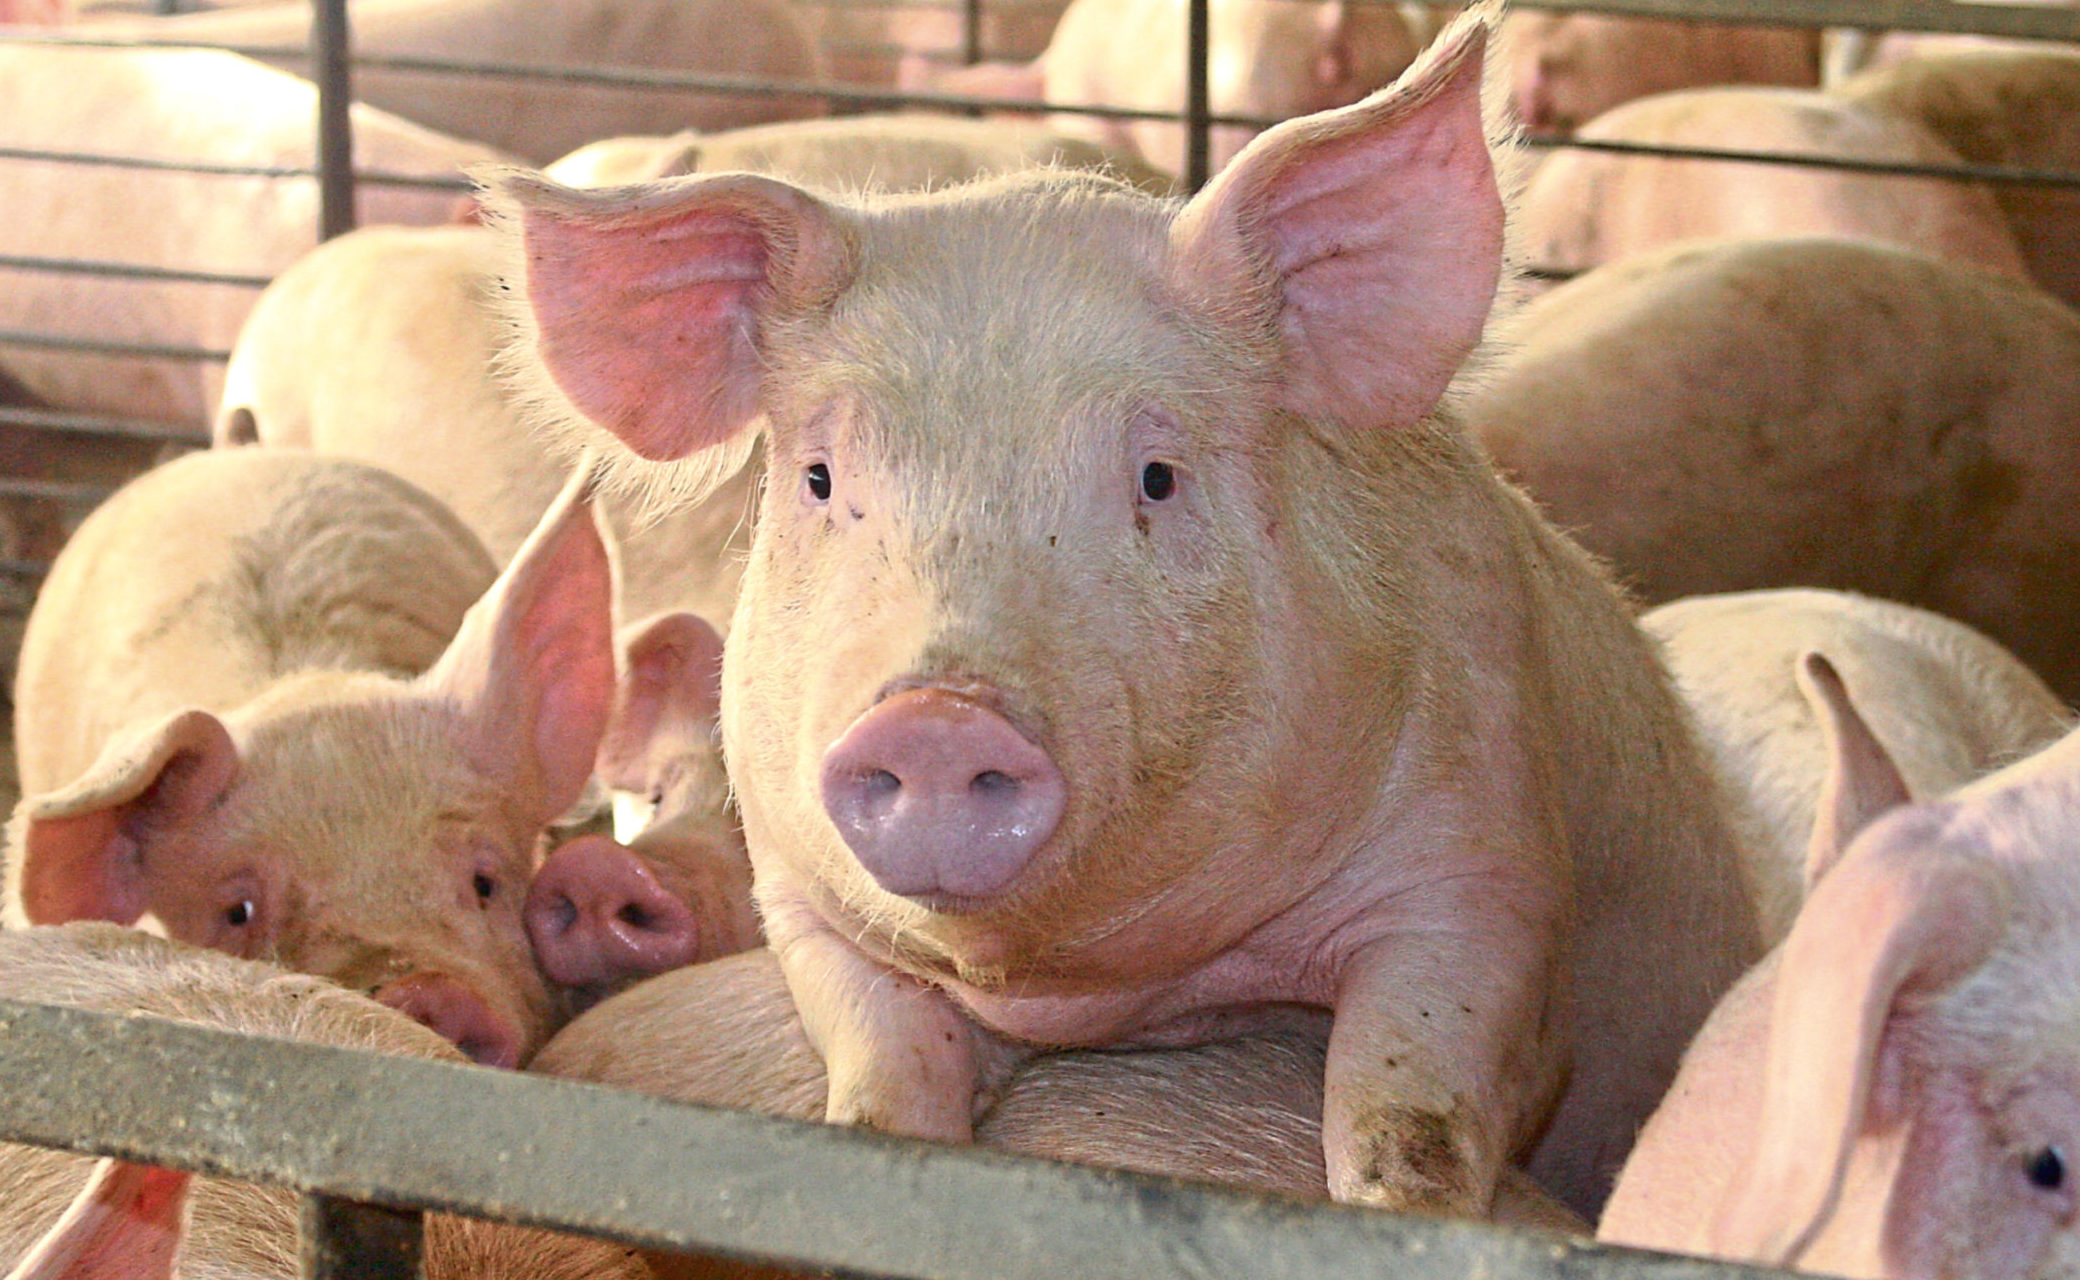 Pig farmers are losing around £20 per pig produced, according to the NPA.